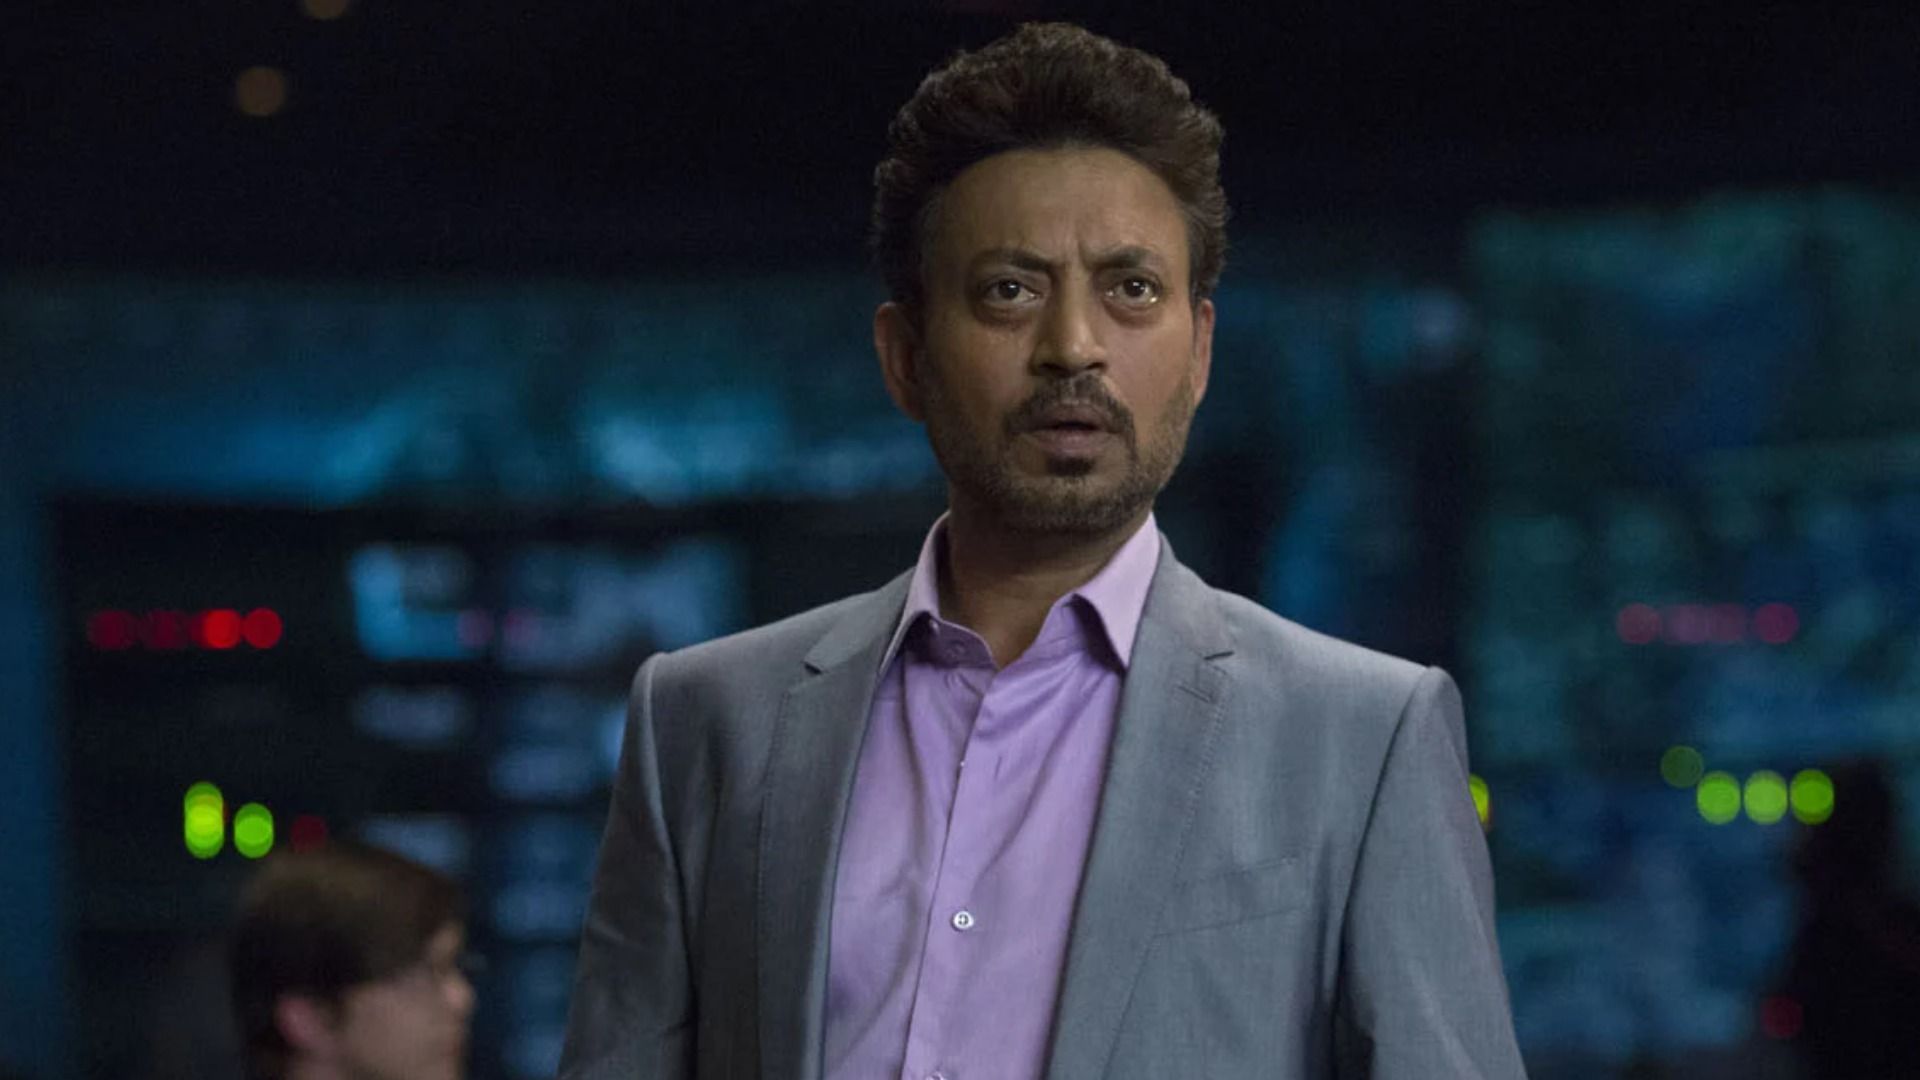 Irrfan Khan, best known for Life of Pi and Jurassic World, has